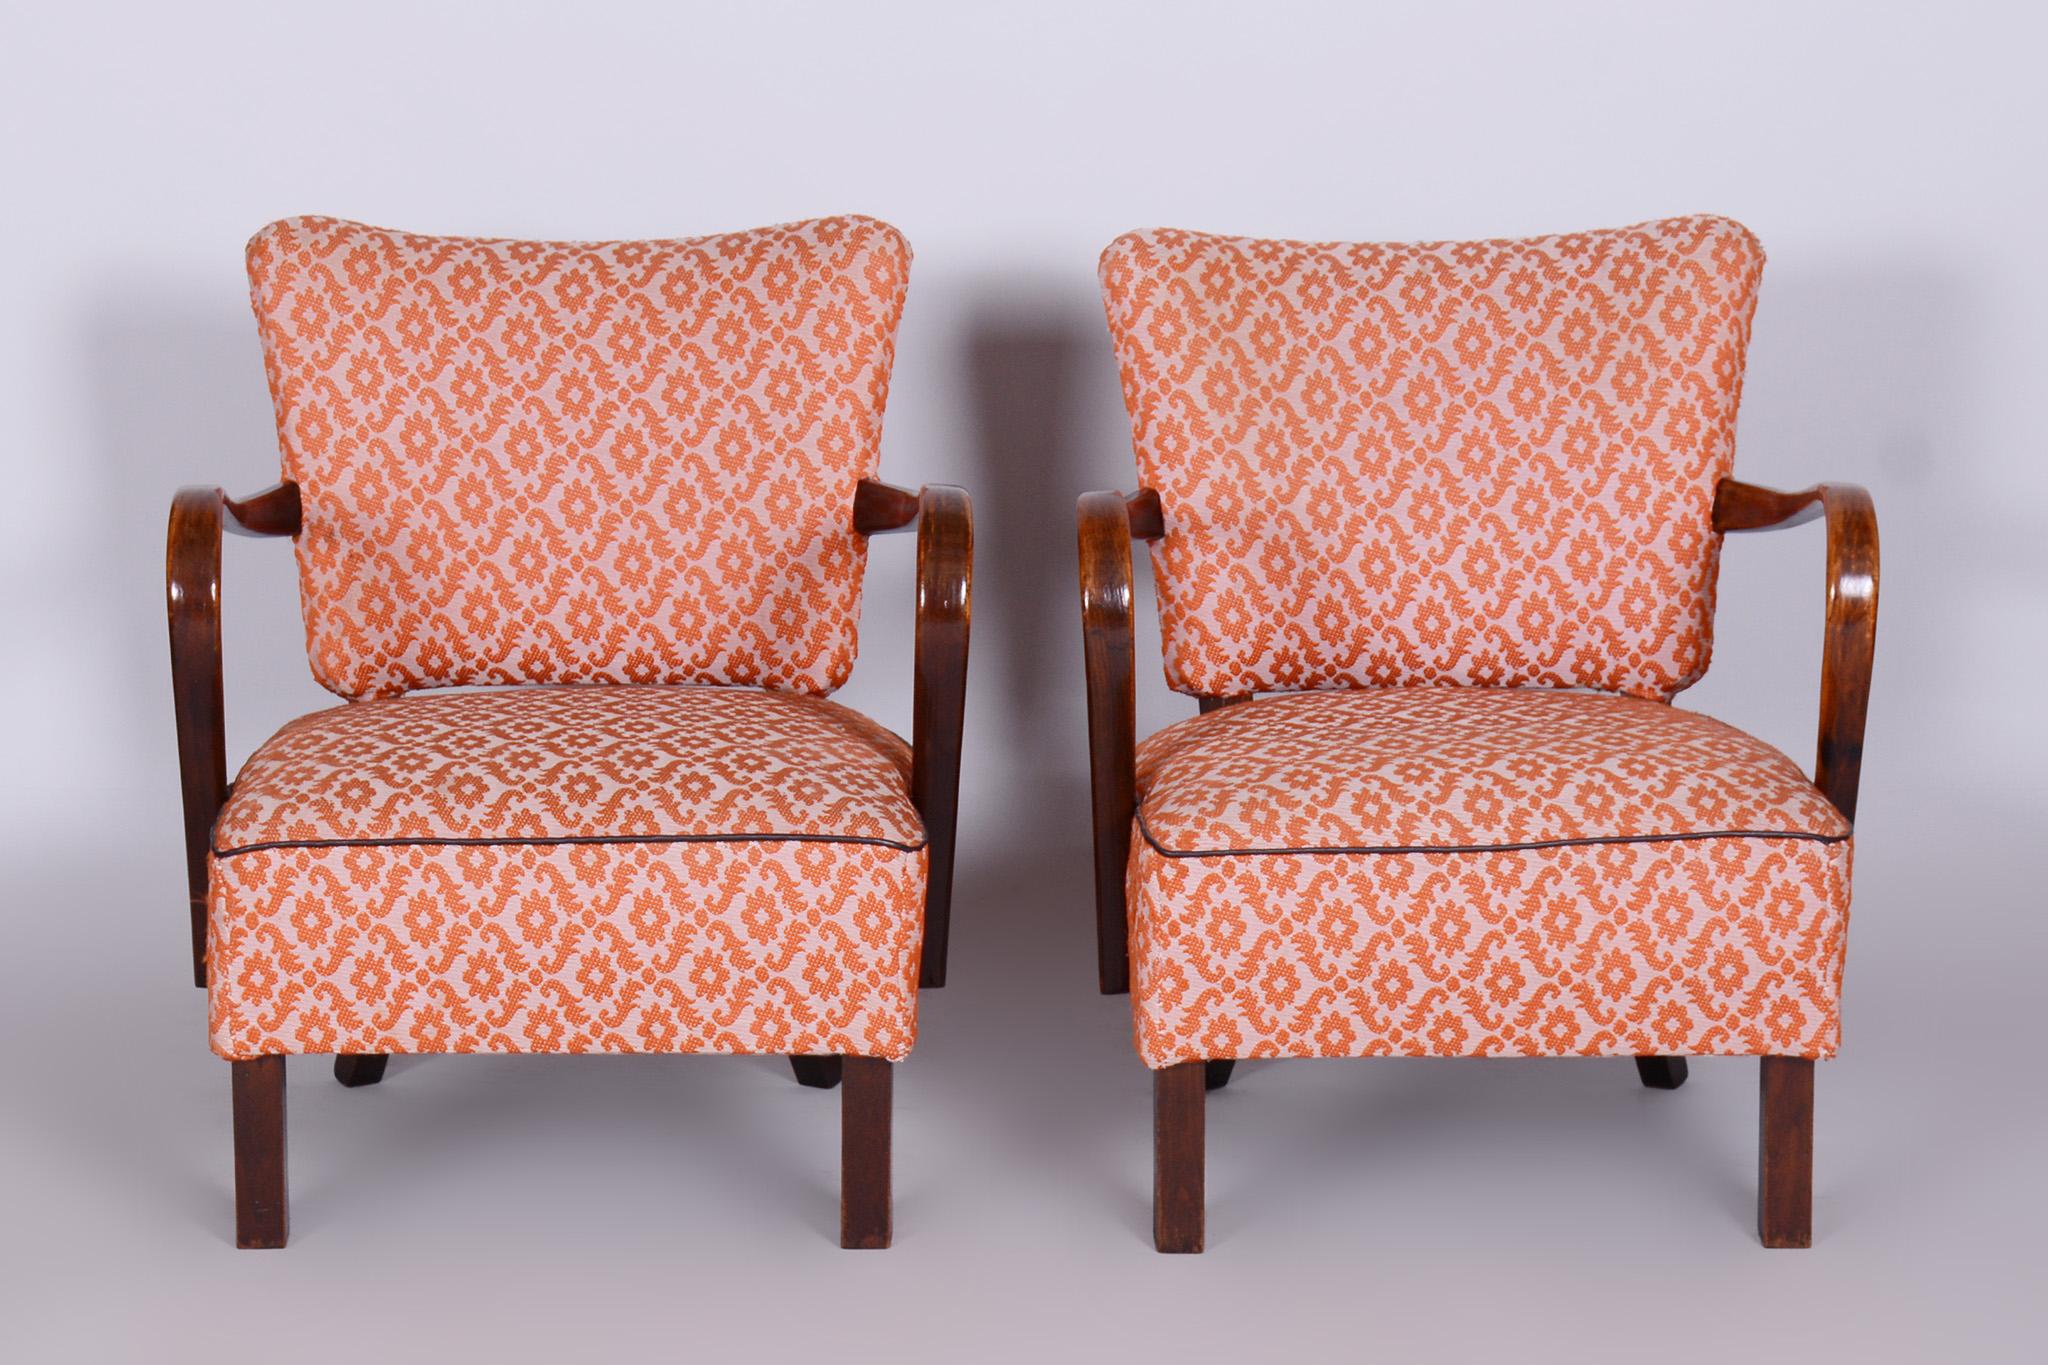 Pair of Beech Art Deco armchairs. 

Period: 1930-1939.
Source: Czechia.

Original very well-preserved condition.
Revived polish.
The upholstery has been professionally cleaned.